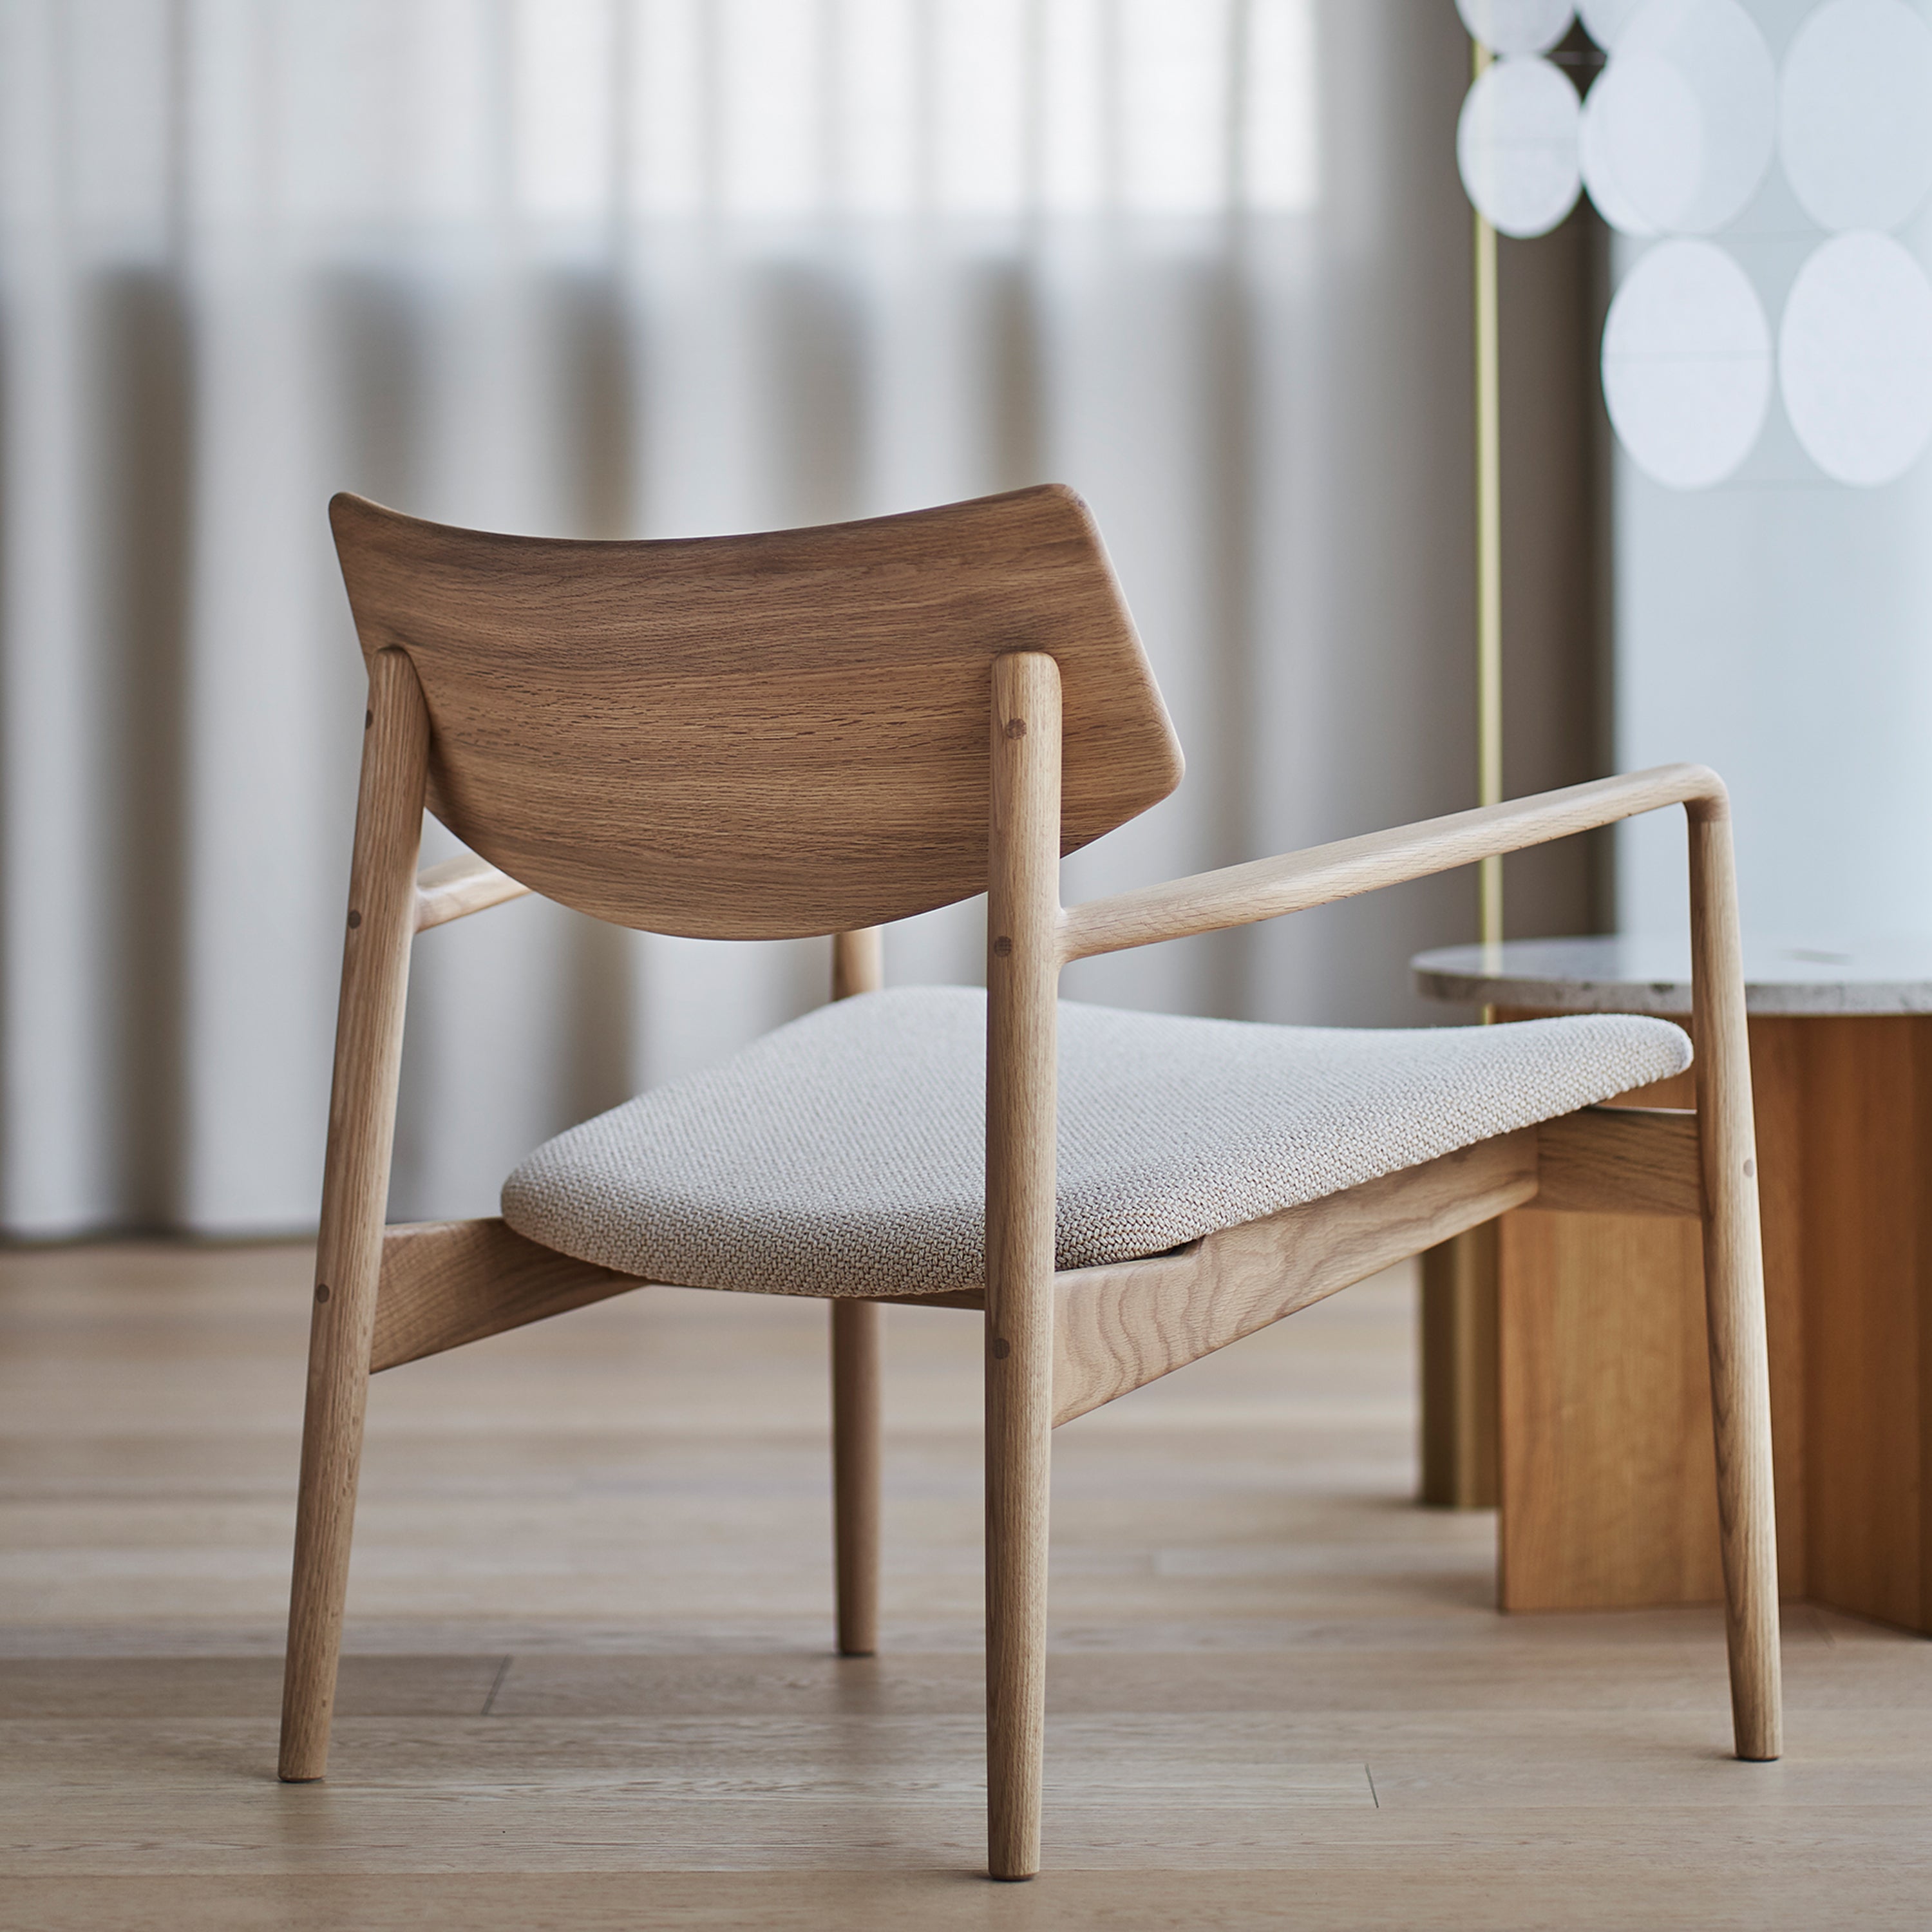 A-LC01 Lounge Chair